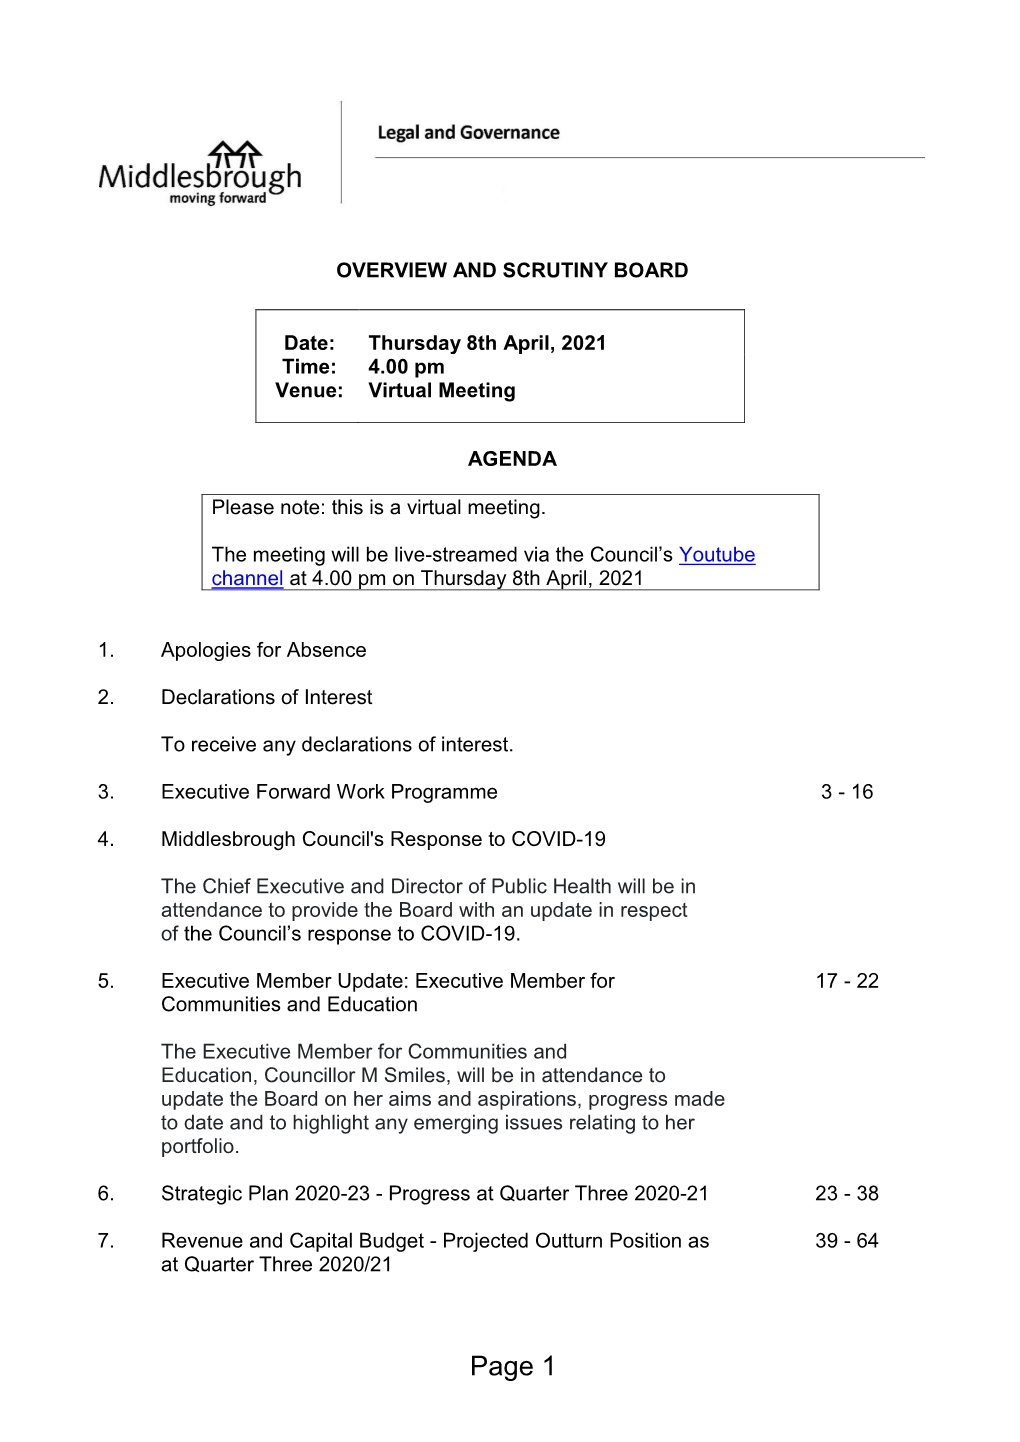 (Public Pack)Agenda Document for Overview and Scrutiny Board, 08/04